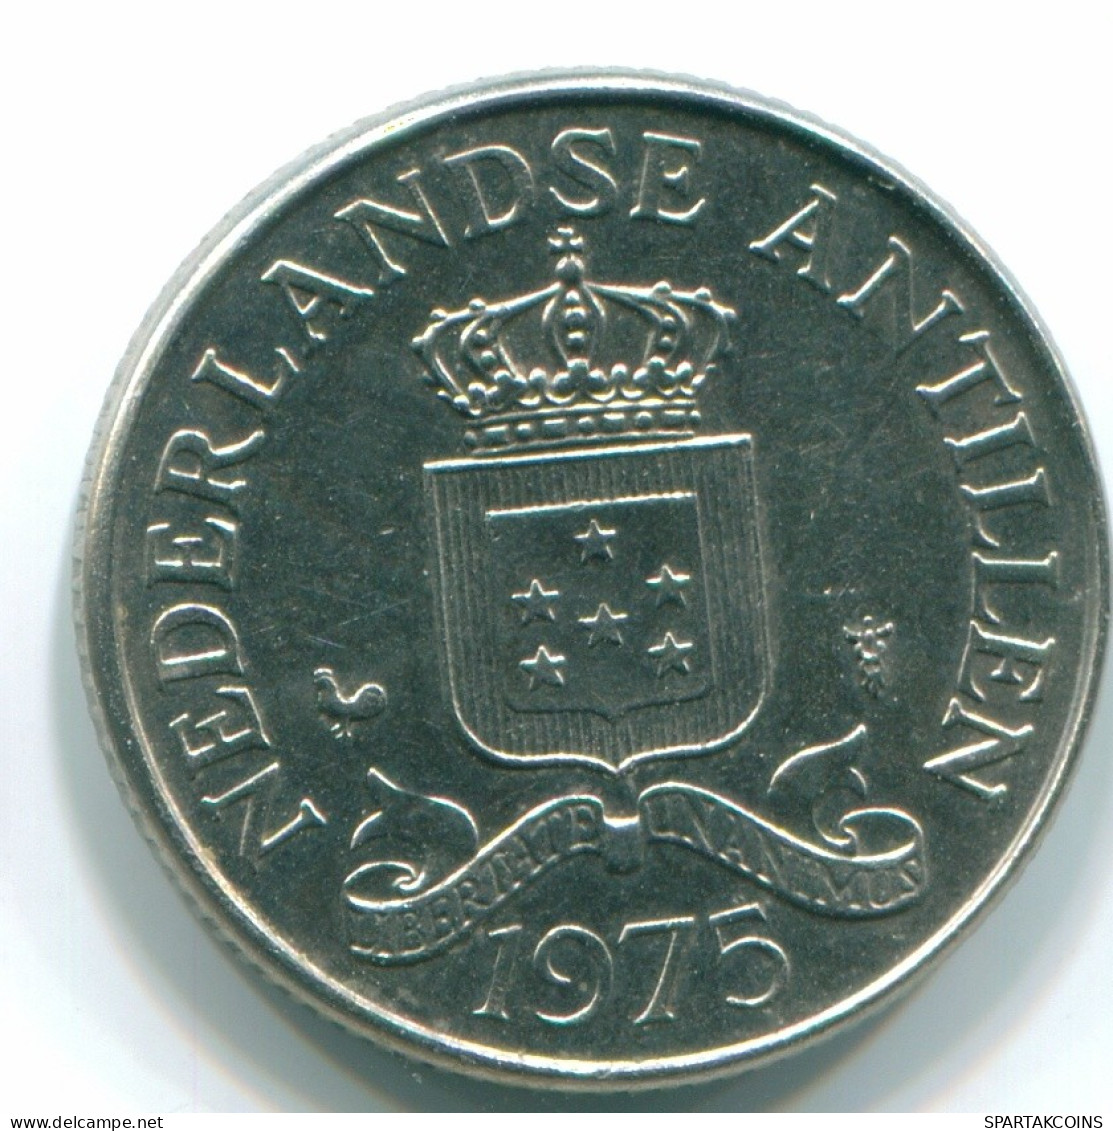 25 CENTS 1975 NETHERLANDS ANTILLES Nickel Colonial Coin #S11630.U.A - Netherlands Antilles